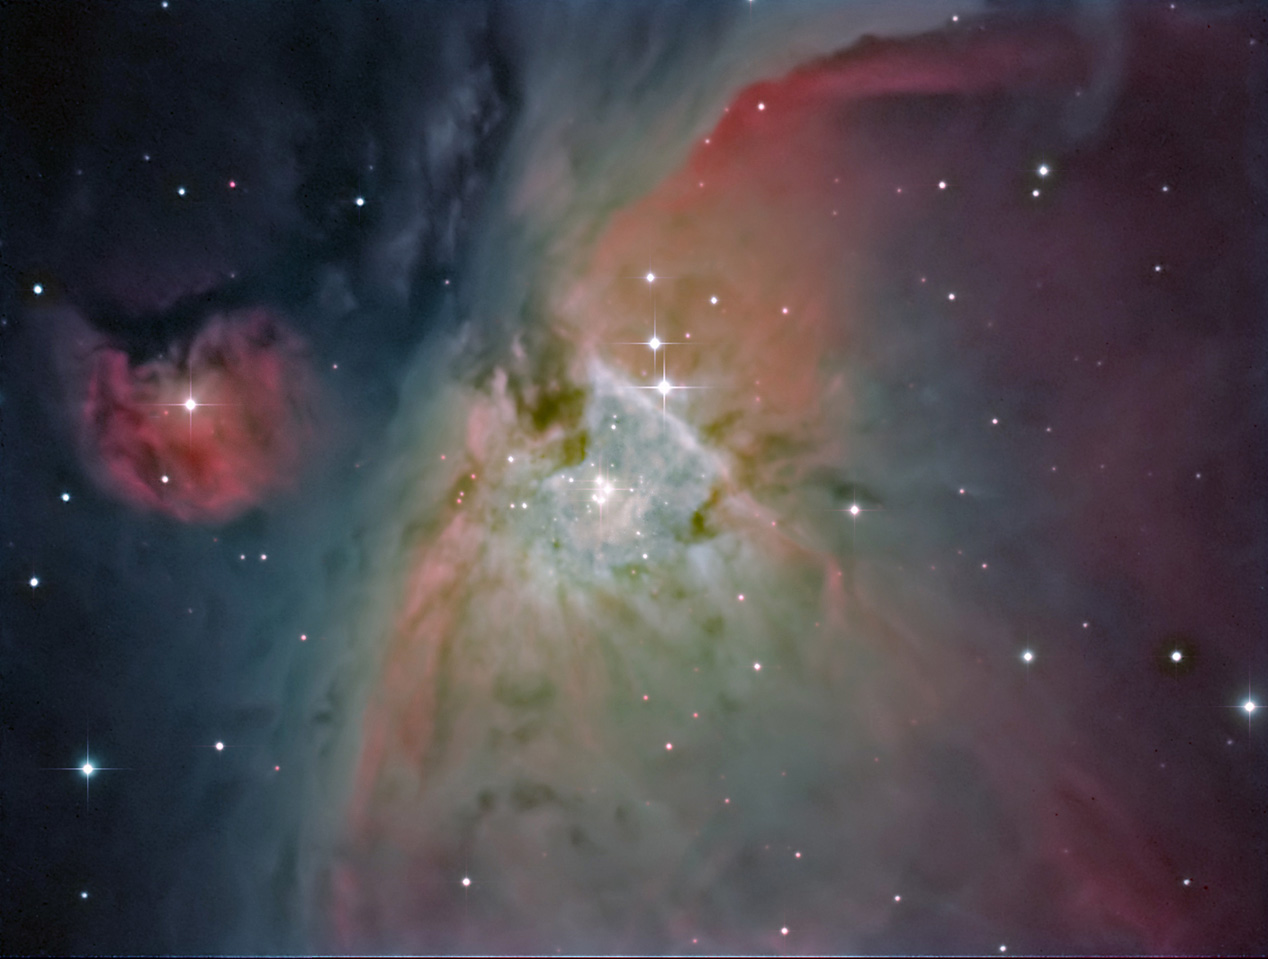 The core of M42 image